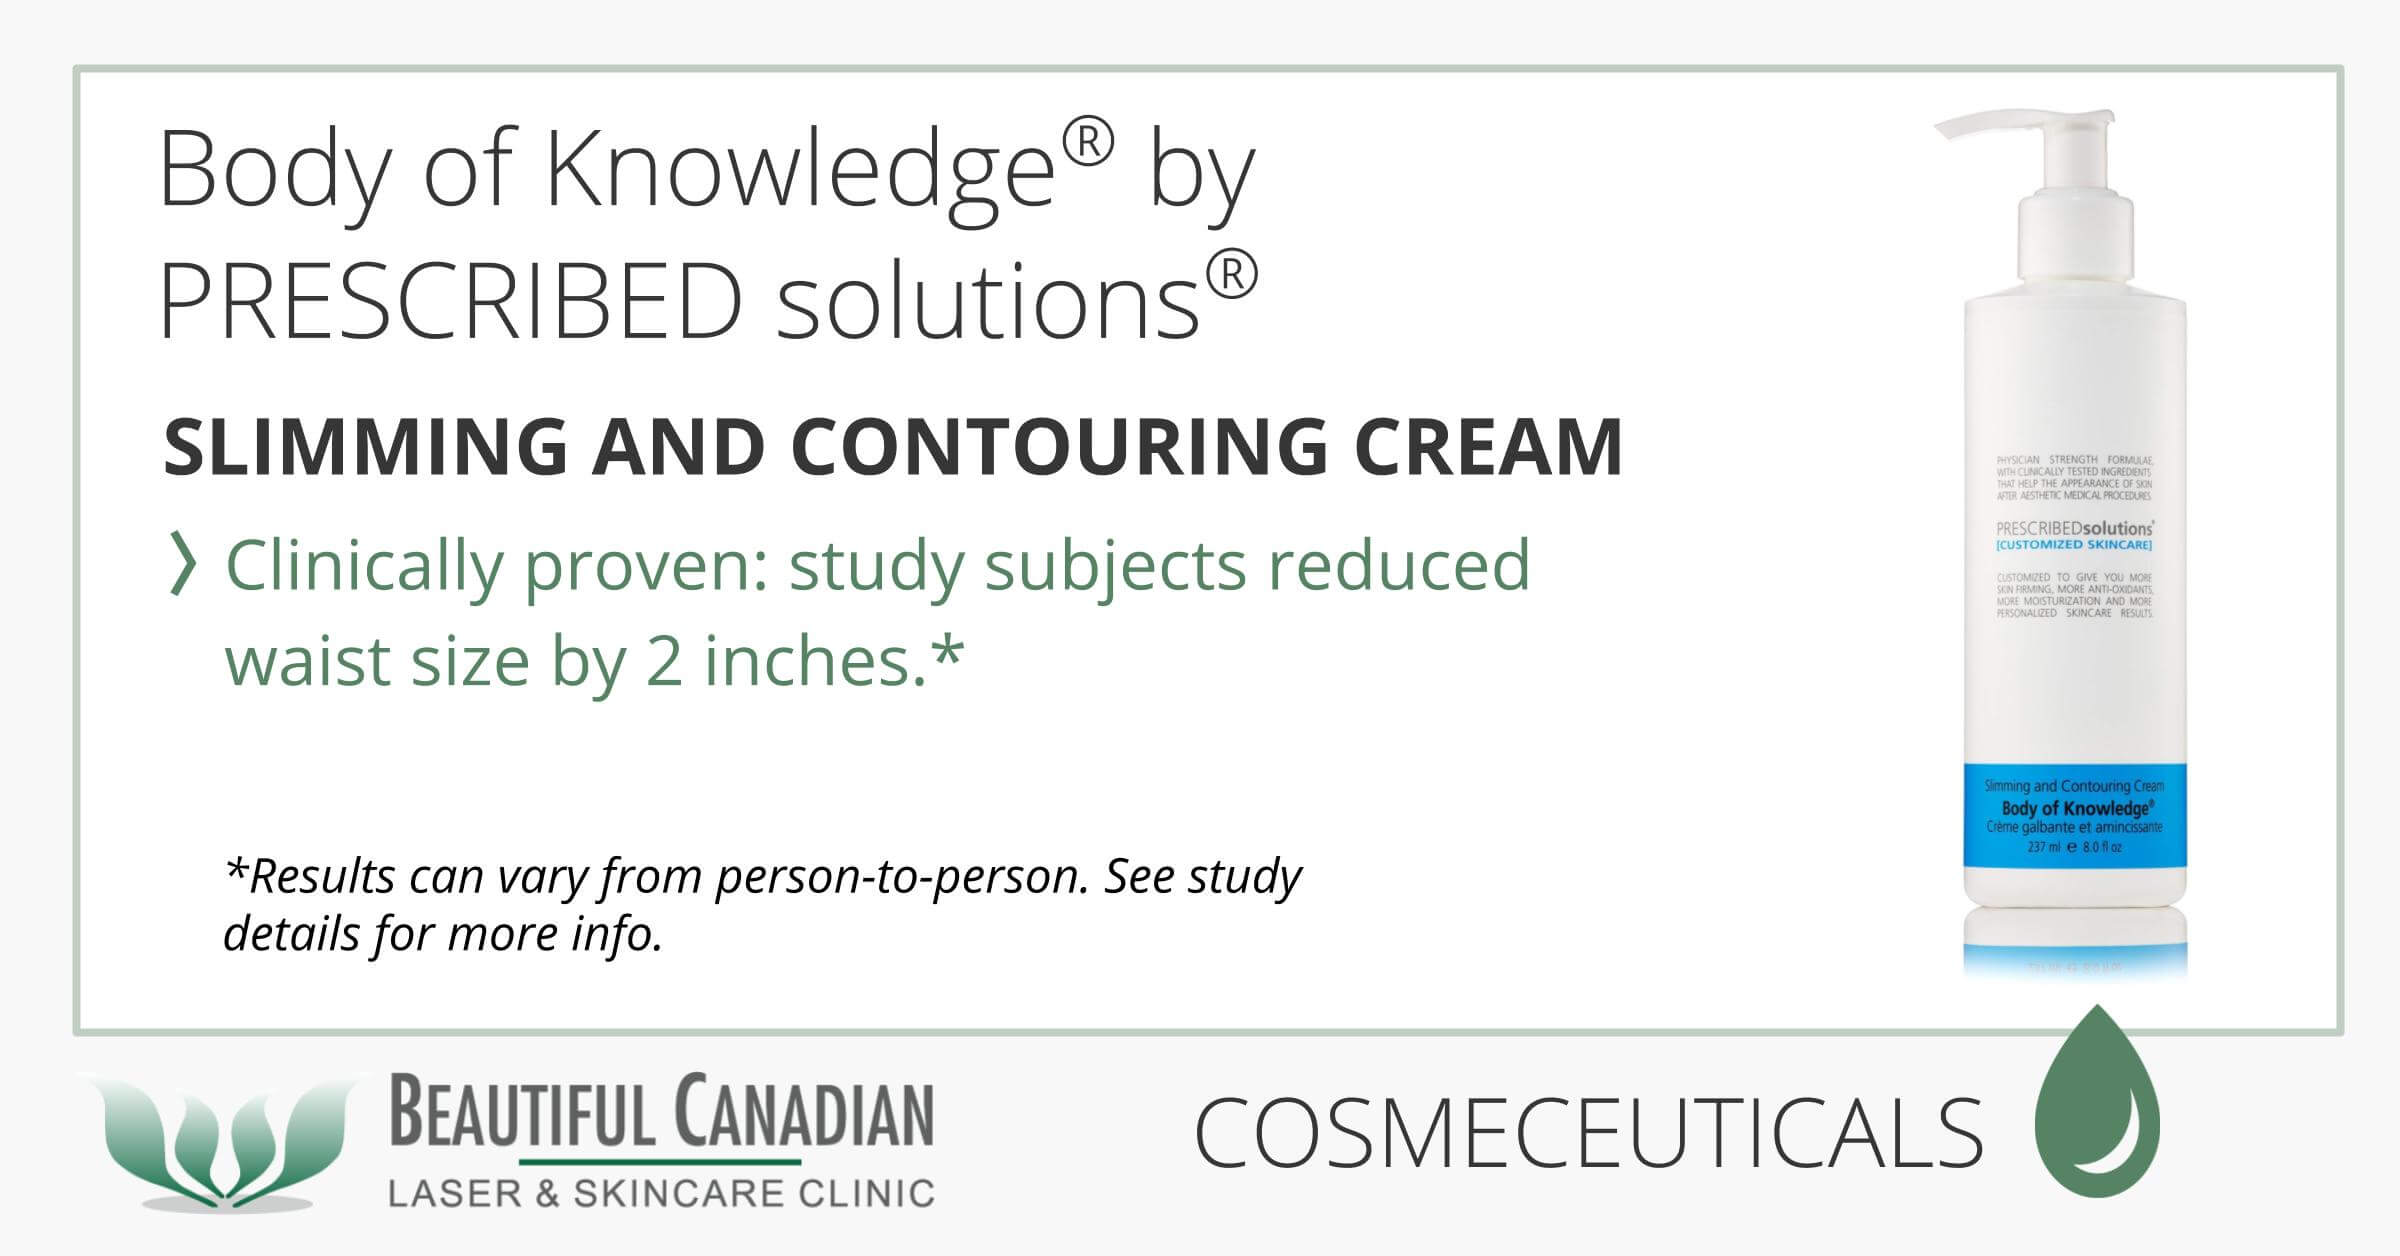 Body of Knowledge® (Body Cream) by PRESCRIBED solutions®